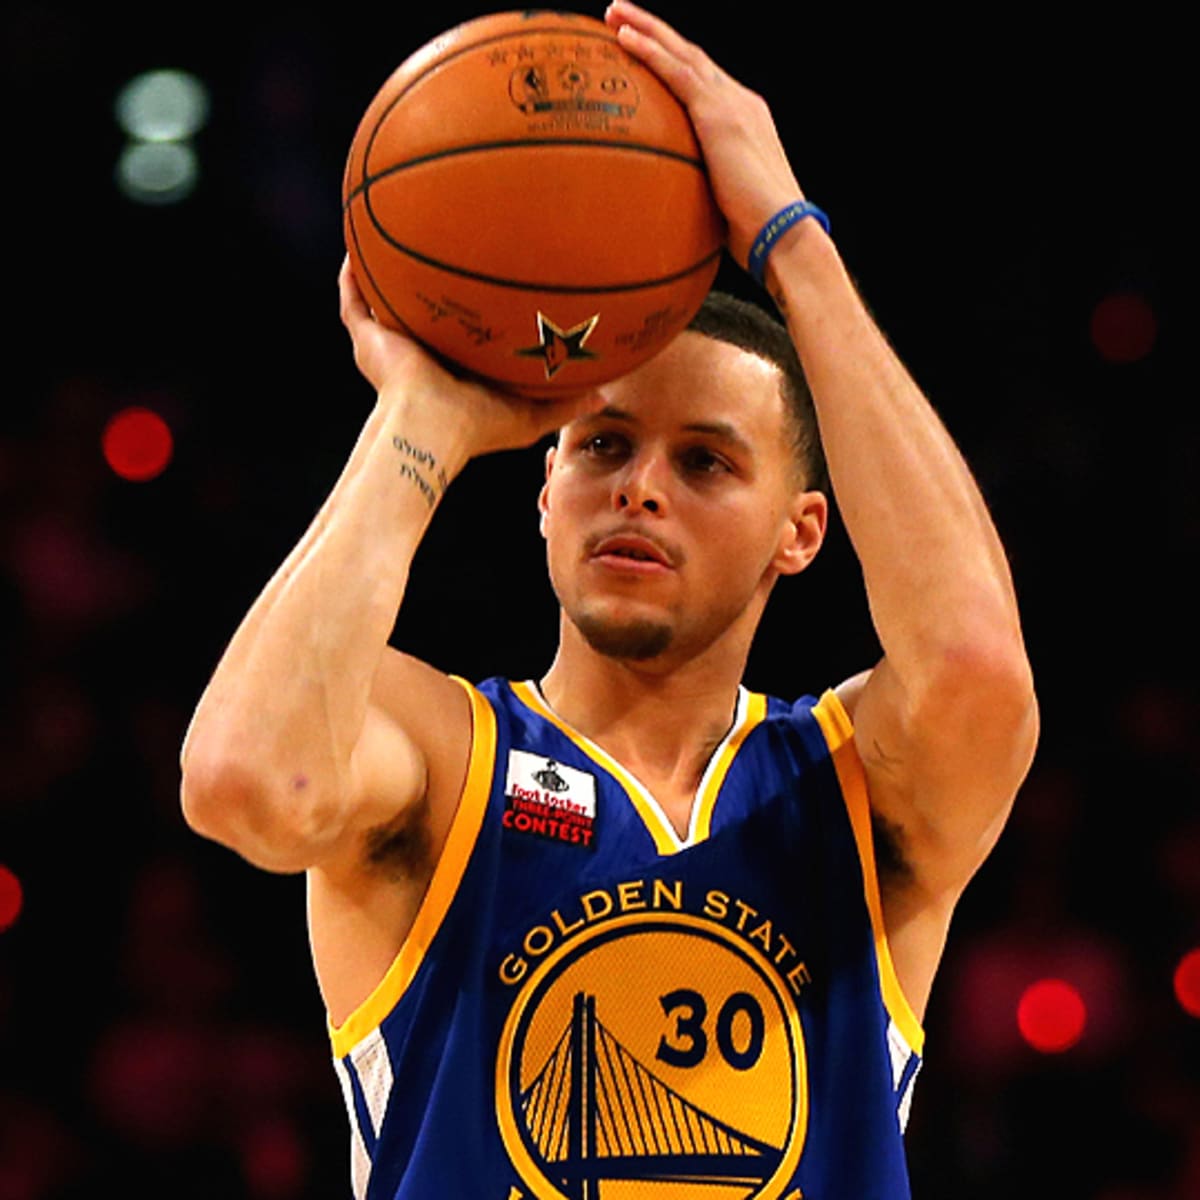 Stephen Curry wins the NBA 3-Point Contest in an absolute thriller